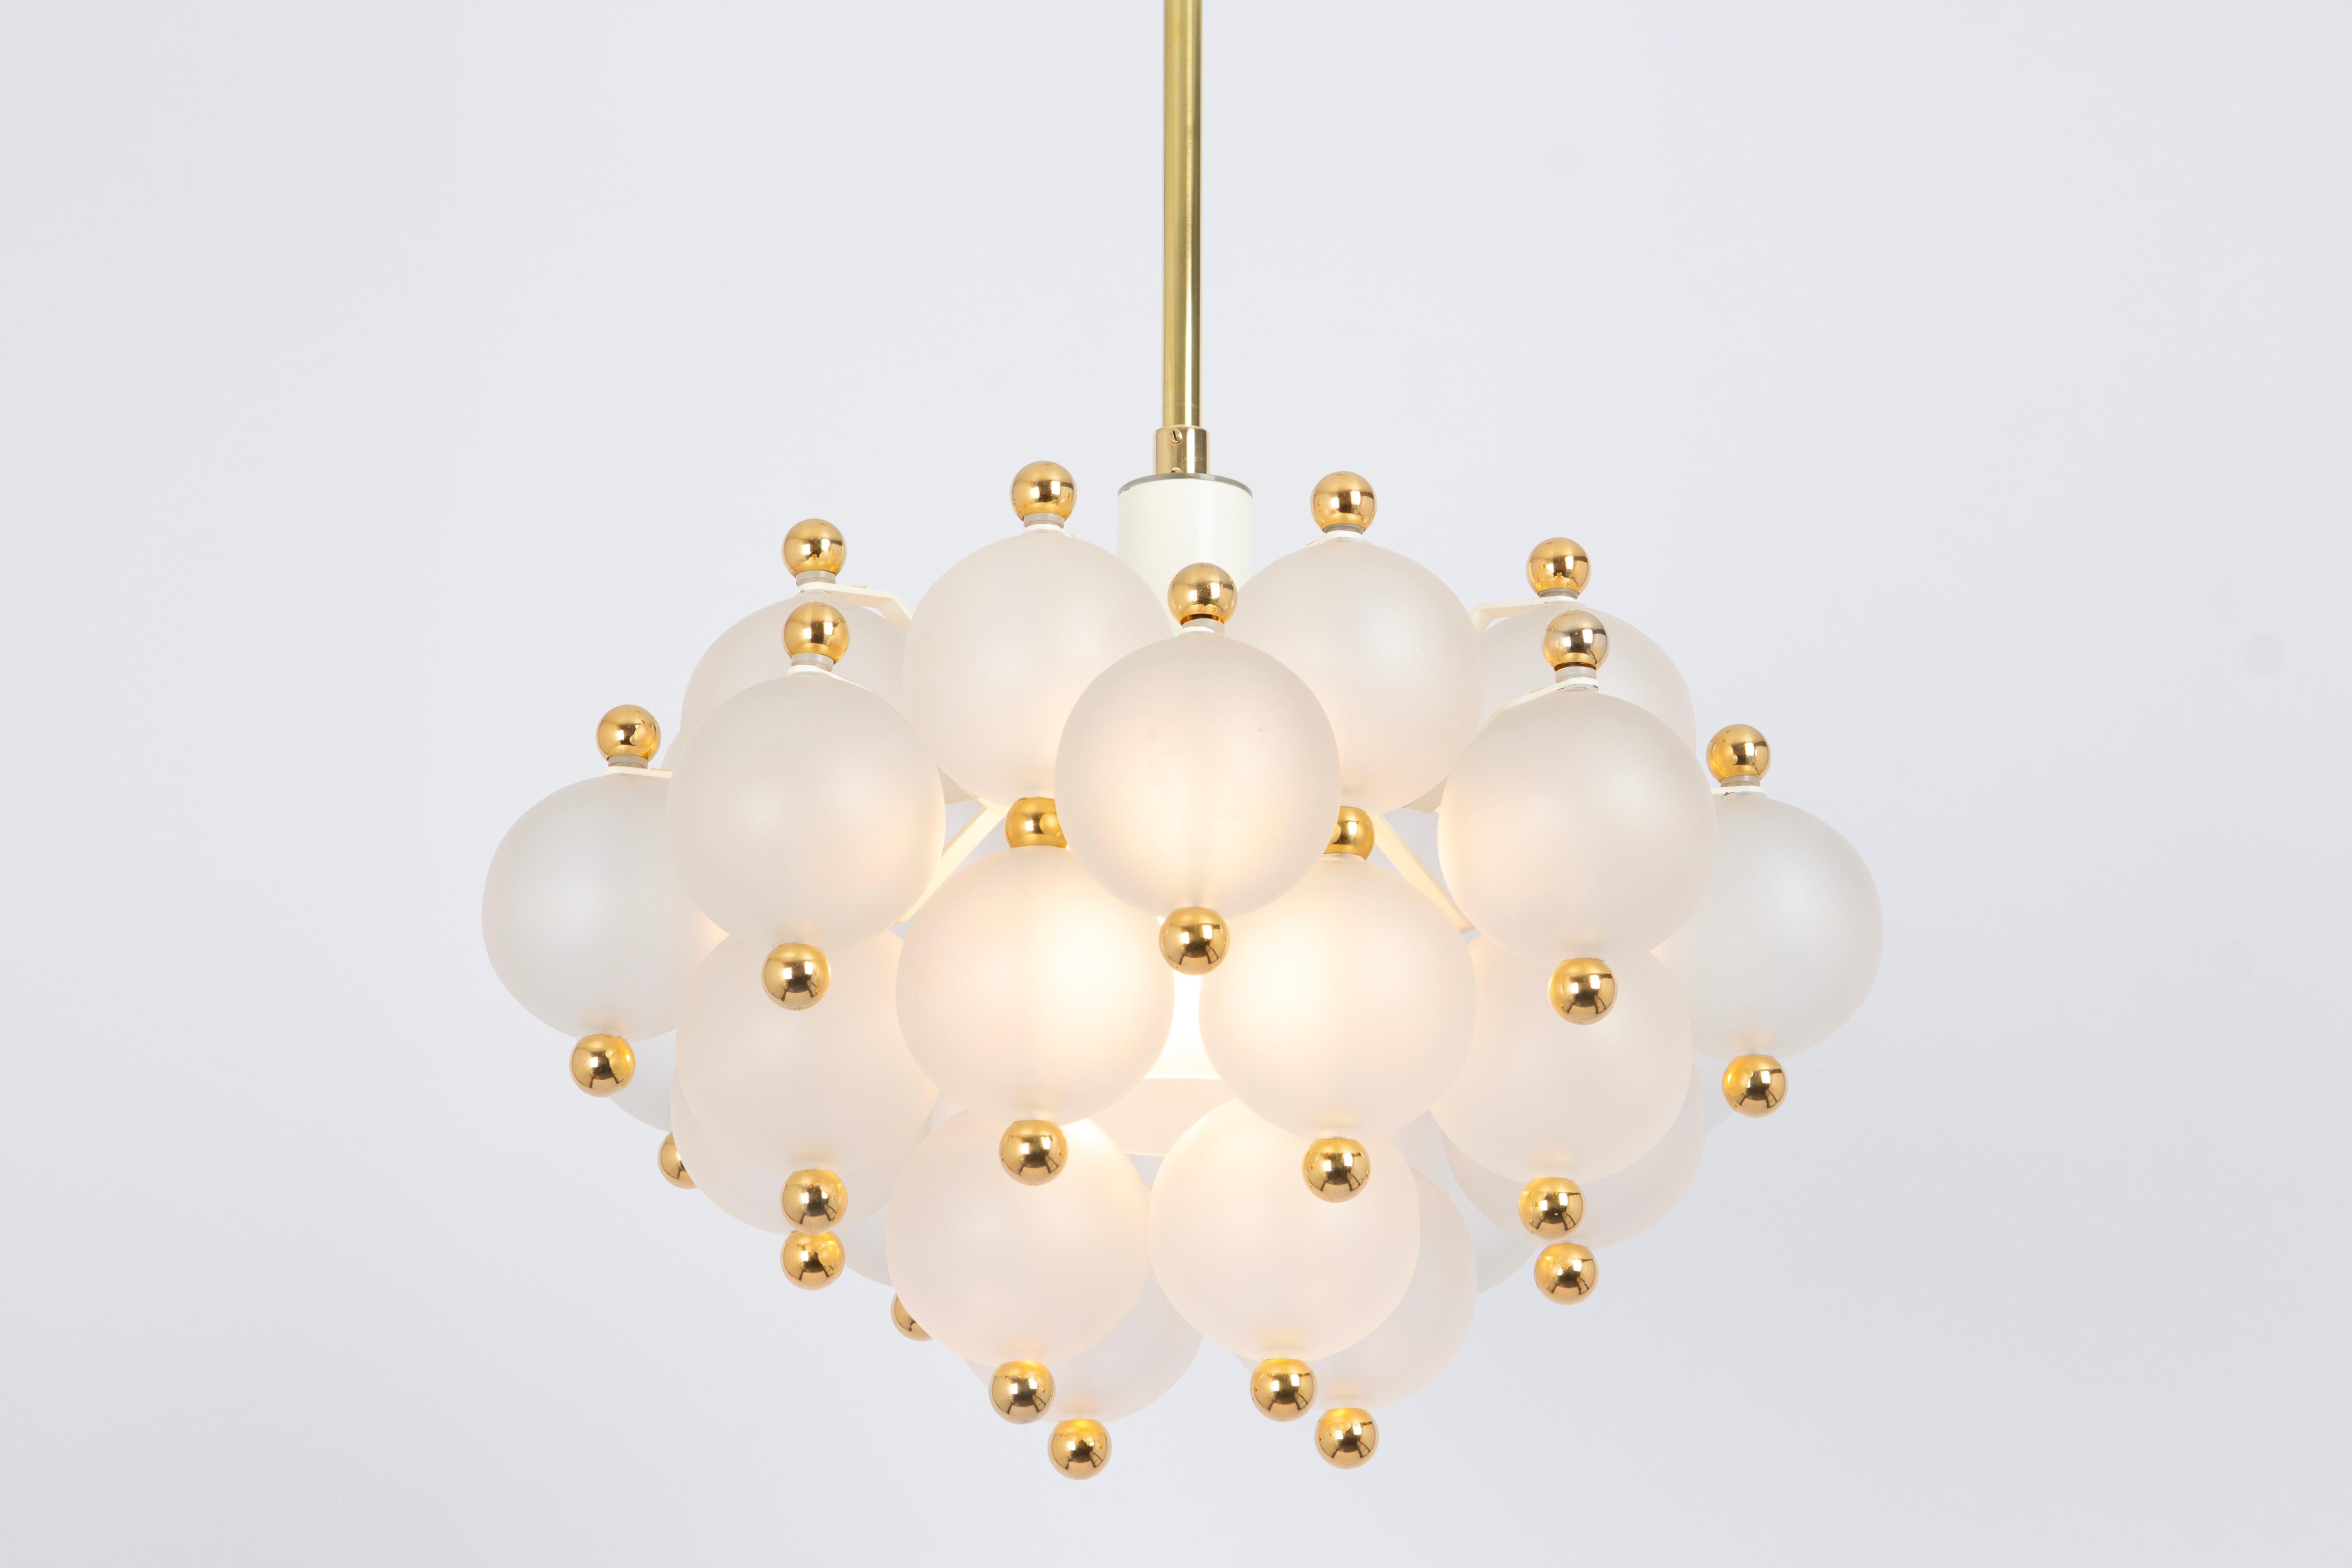 Large Frosted Glass and Brass Chandelier by Kinkeldey, Germany, 1970s For Sale 4